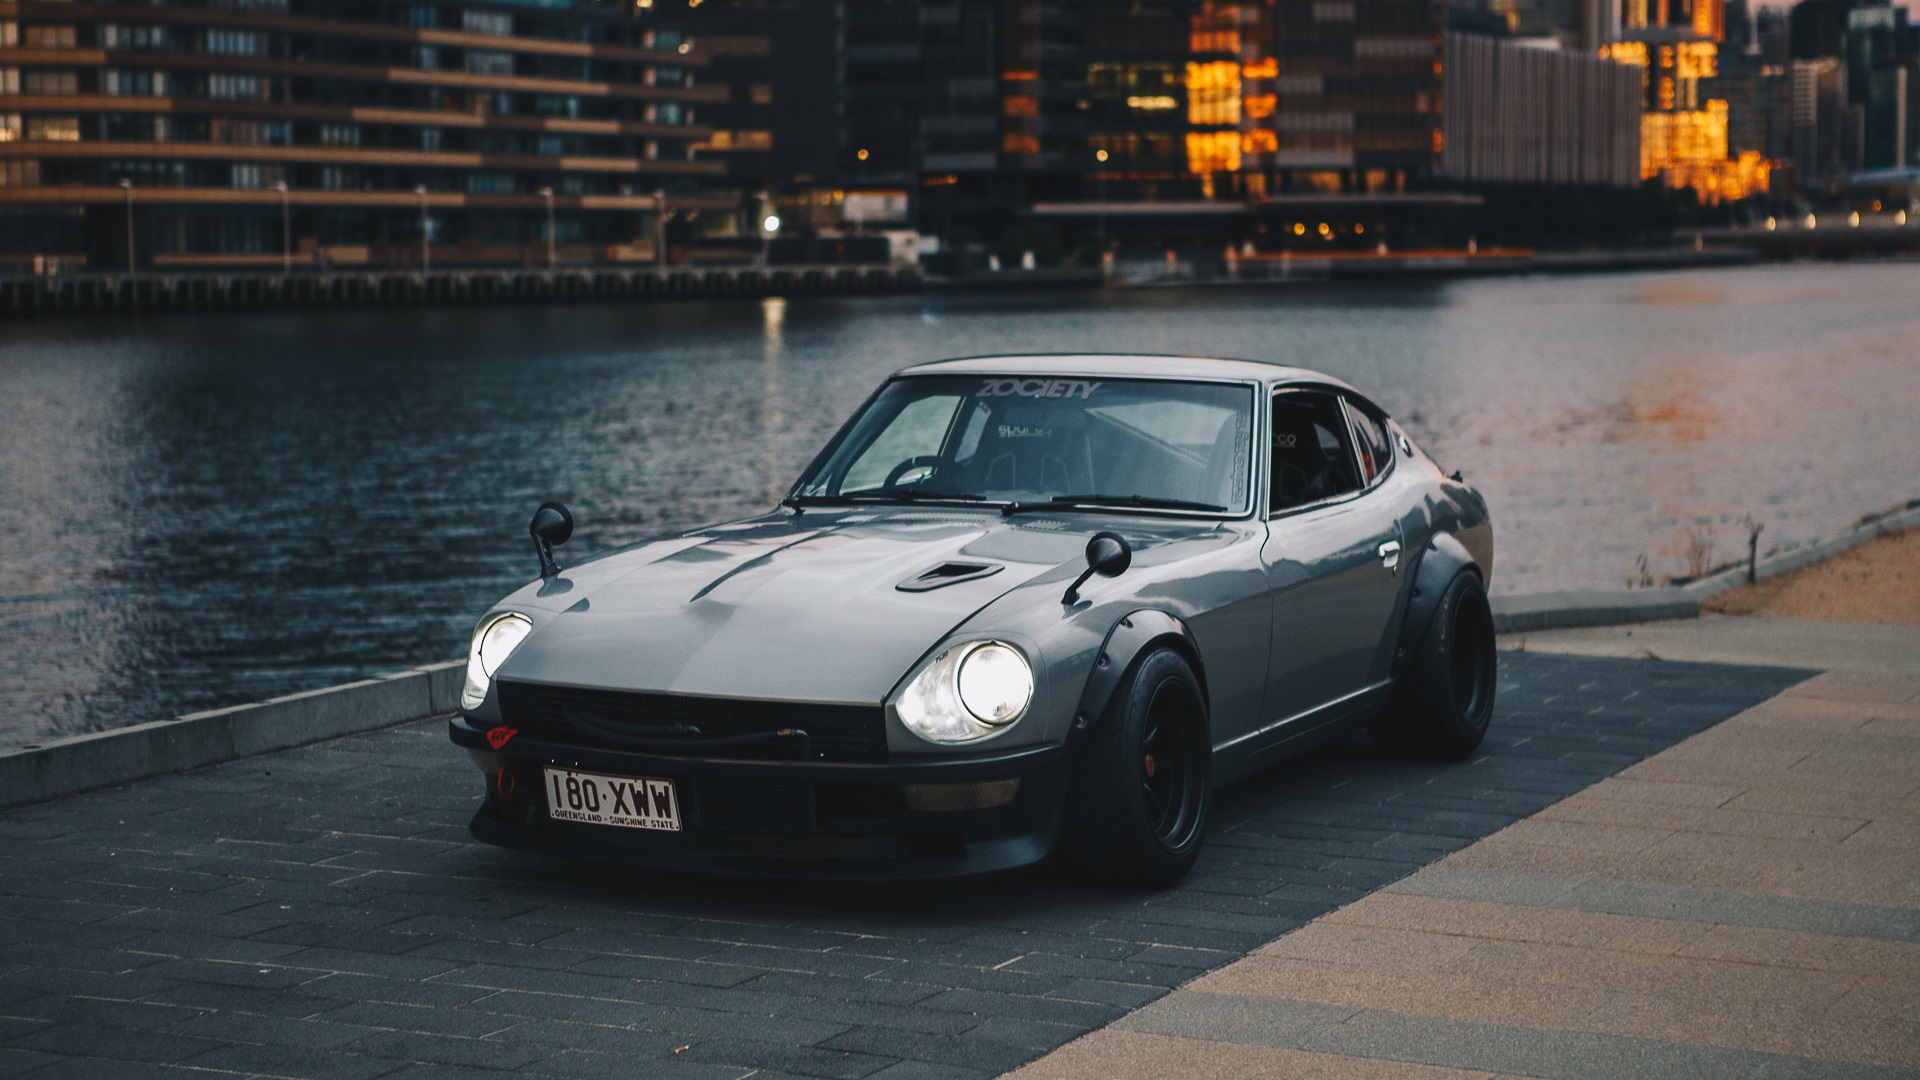 General 1920x1080 Nissan S30 Nissan Fairlady Z Japanese cars sports car Nissan city silver cars car vehicle river frontal view bolt-on fender flares gray cars pavers outdoors